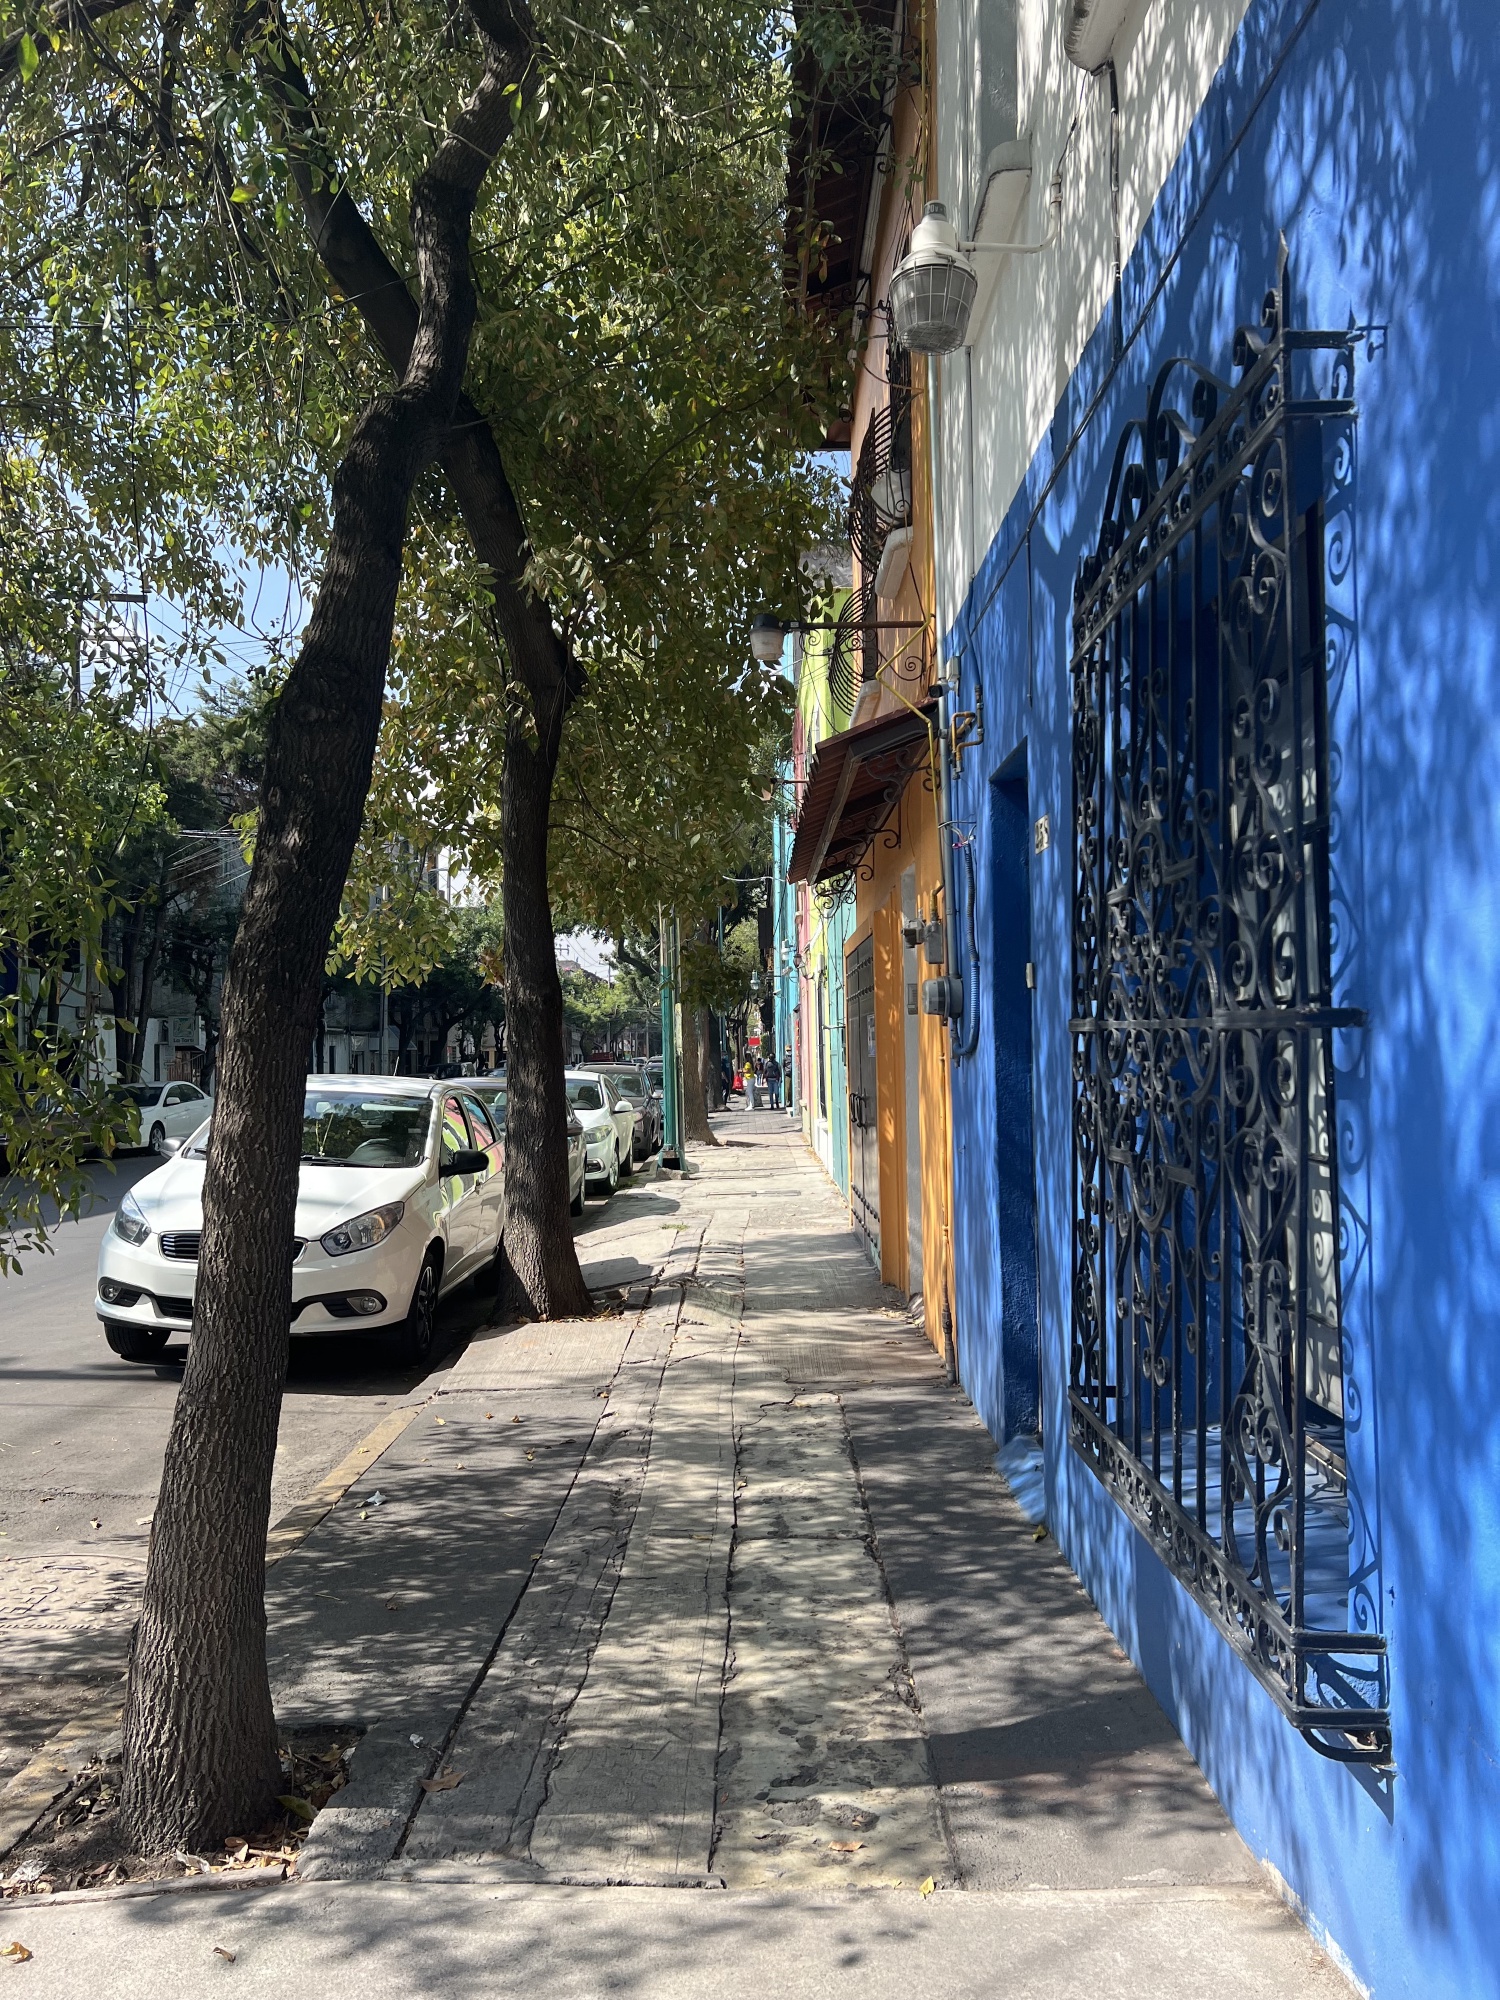 This is our neighborhood in CDMX this time, where it has a homey feel and lined with colorful houses and trees that protect you from the sun.